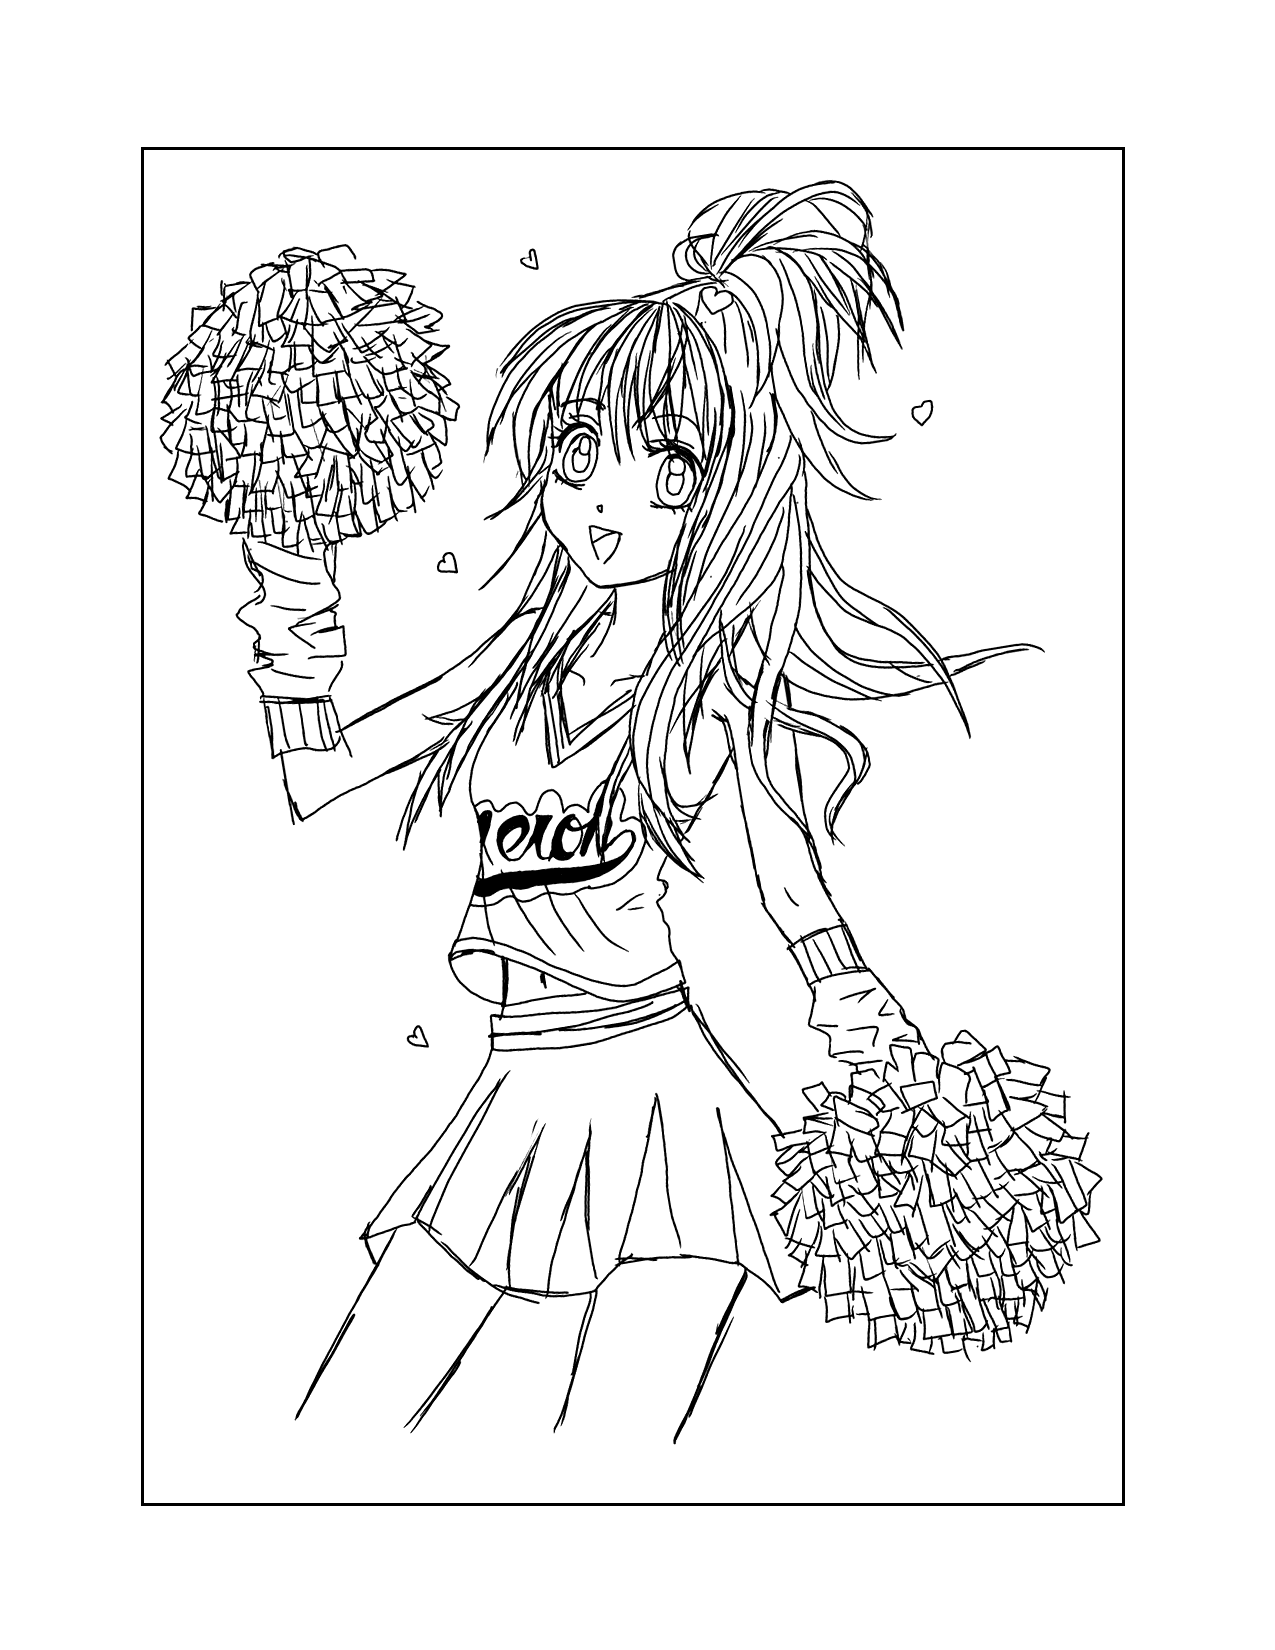 Cute Anime Cheerleader Coloring Page